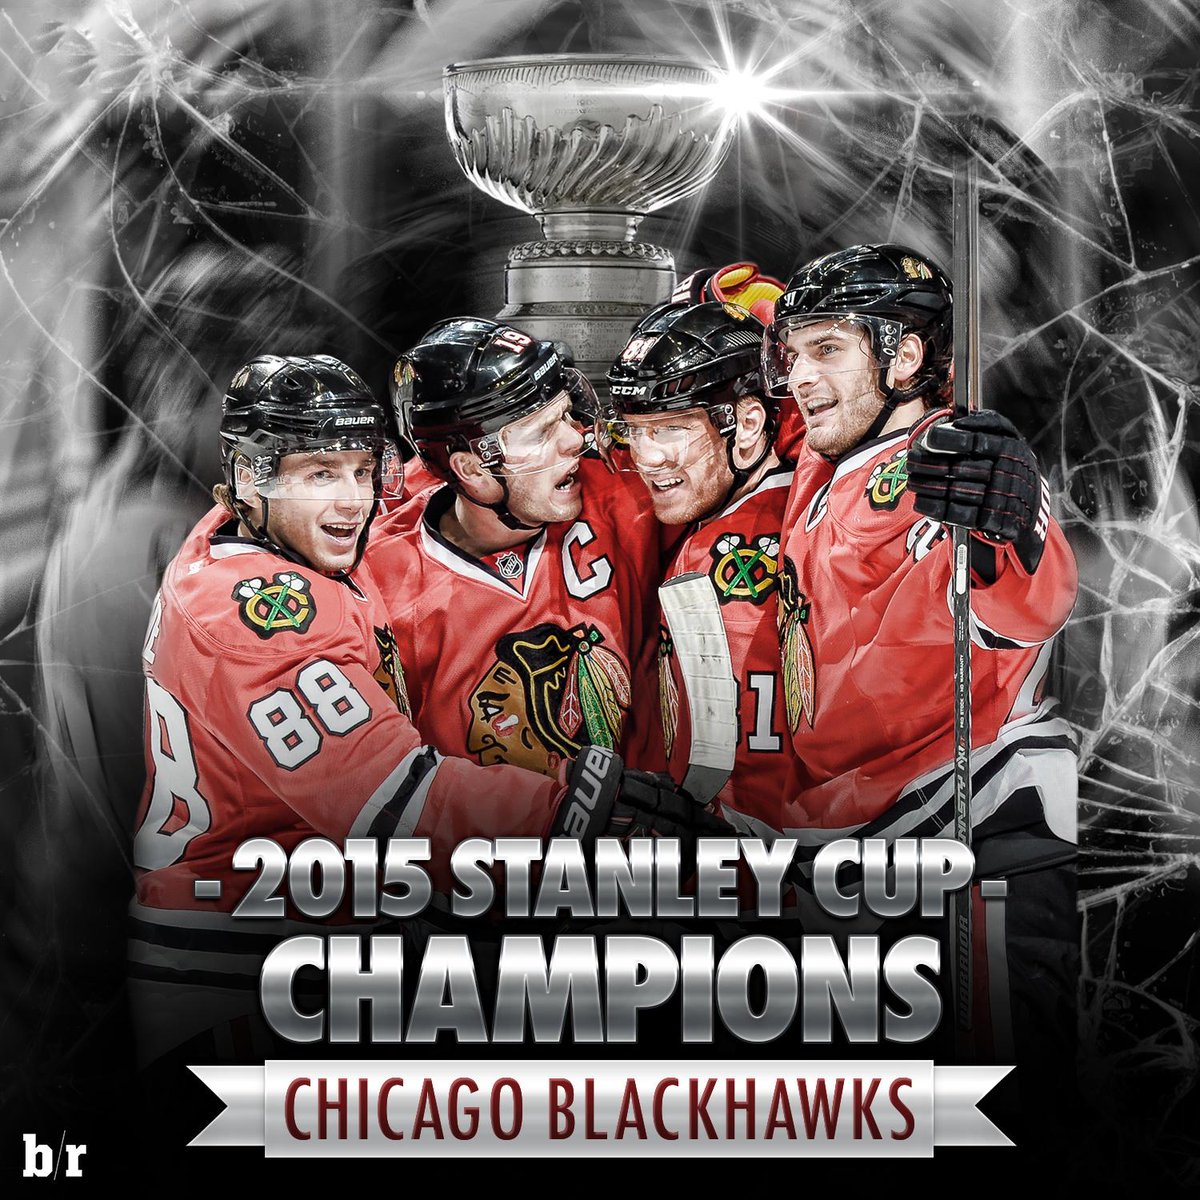 The Chicago Blackhawks​ beat the Tampa Bay Lightning​ 2-0 to win the Stanley Cup!